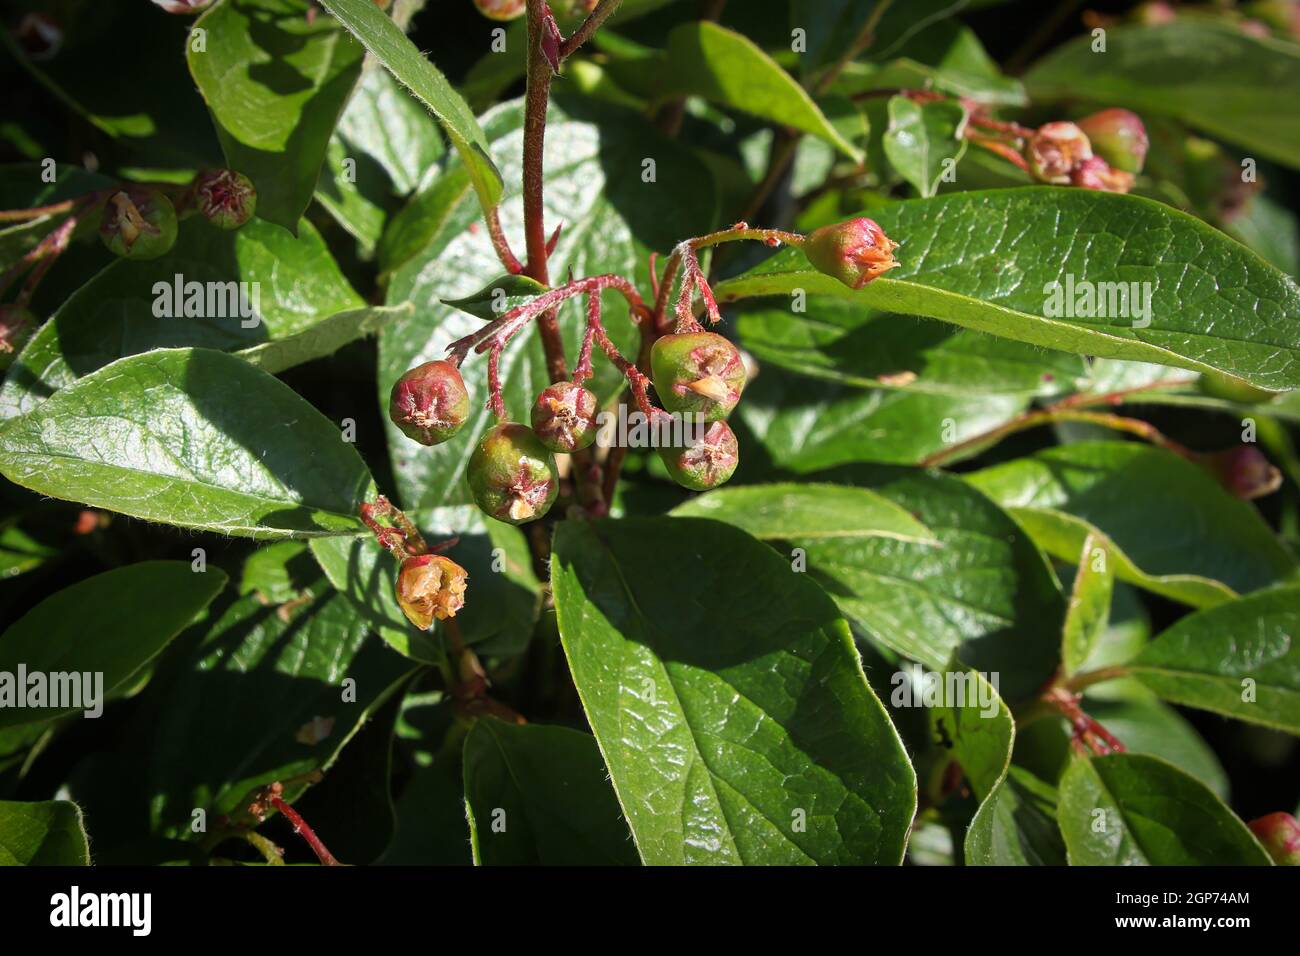 Bckground of cotoneaster leaves and green berry clusters. Stock Photo